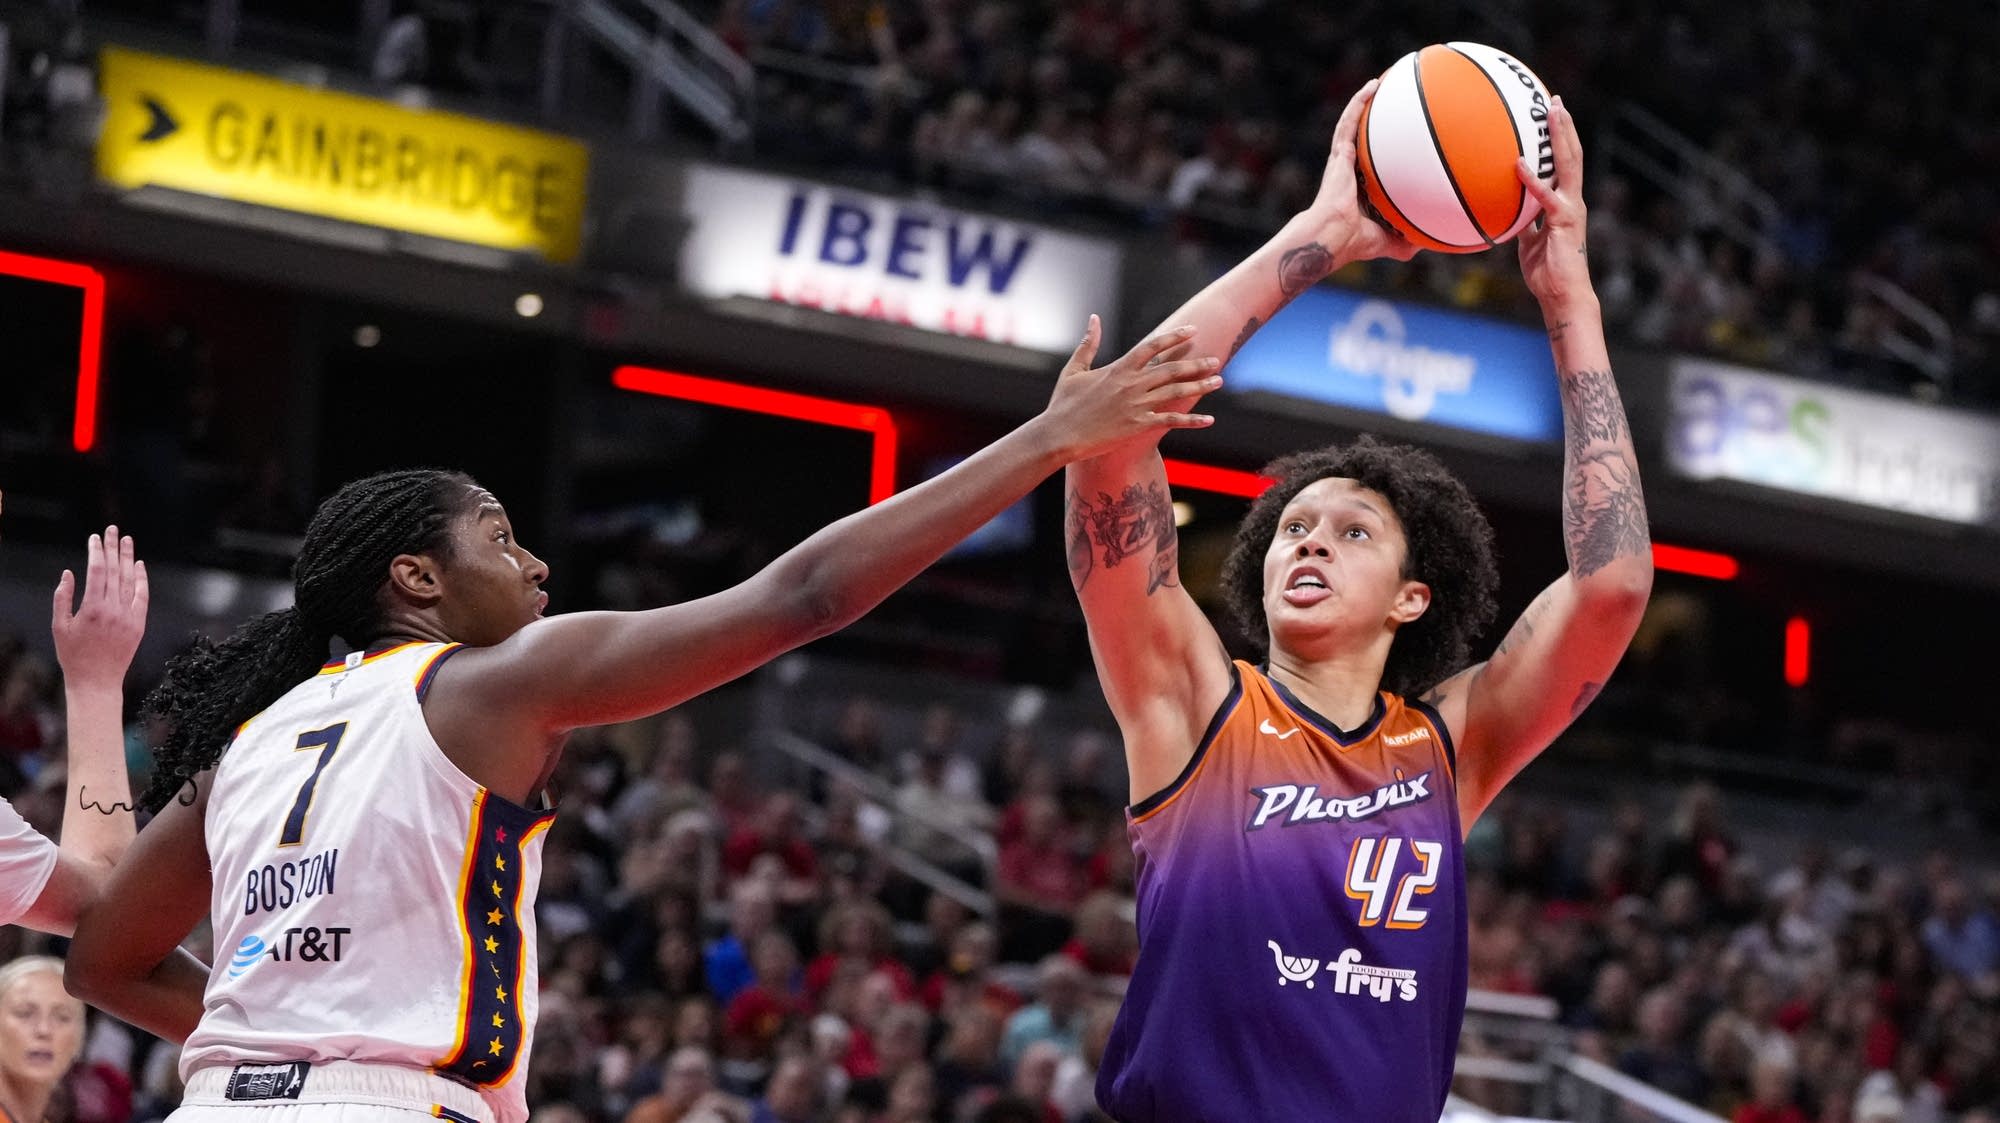 Griner, Jones among WNBA's picks for Friday's competitions. Clark, Ionescu won't participate